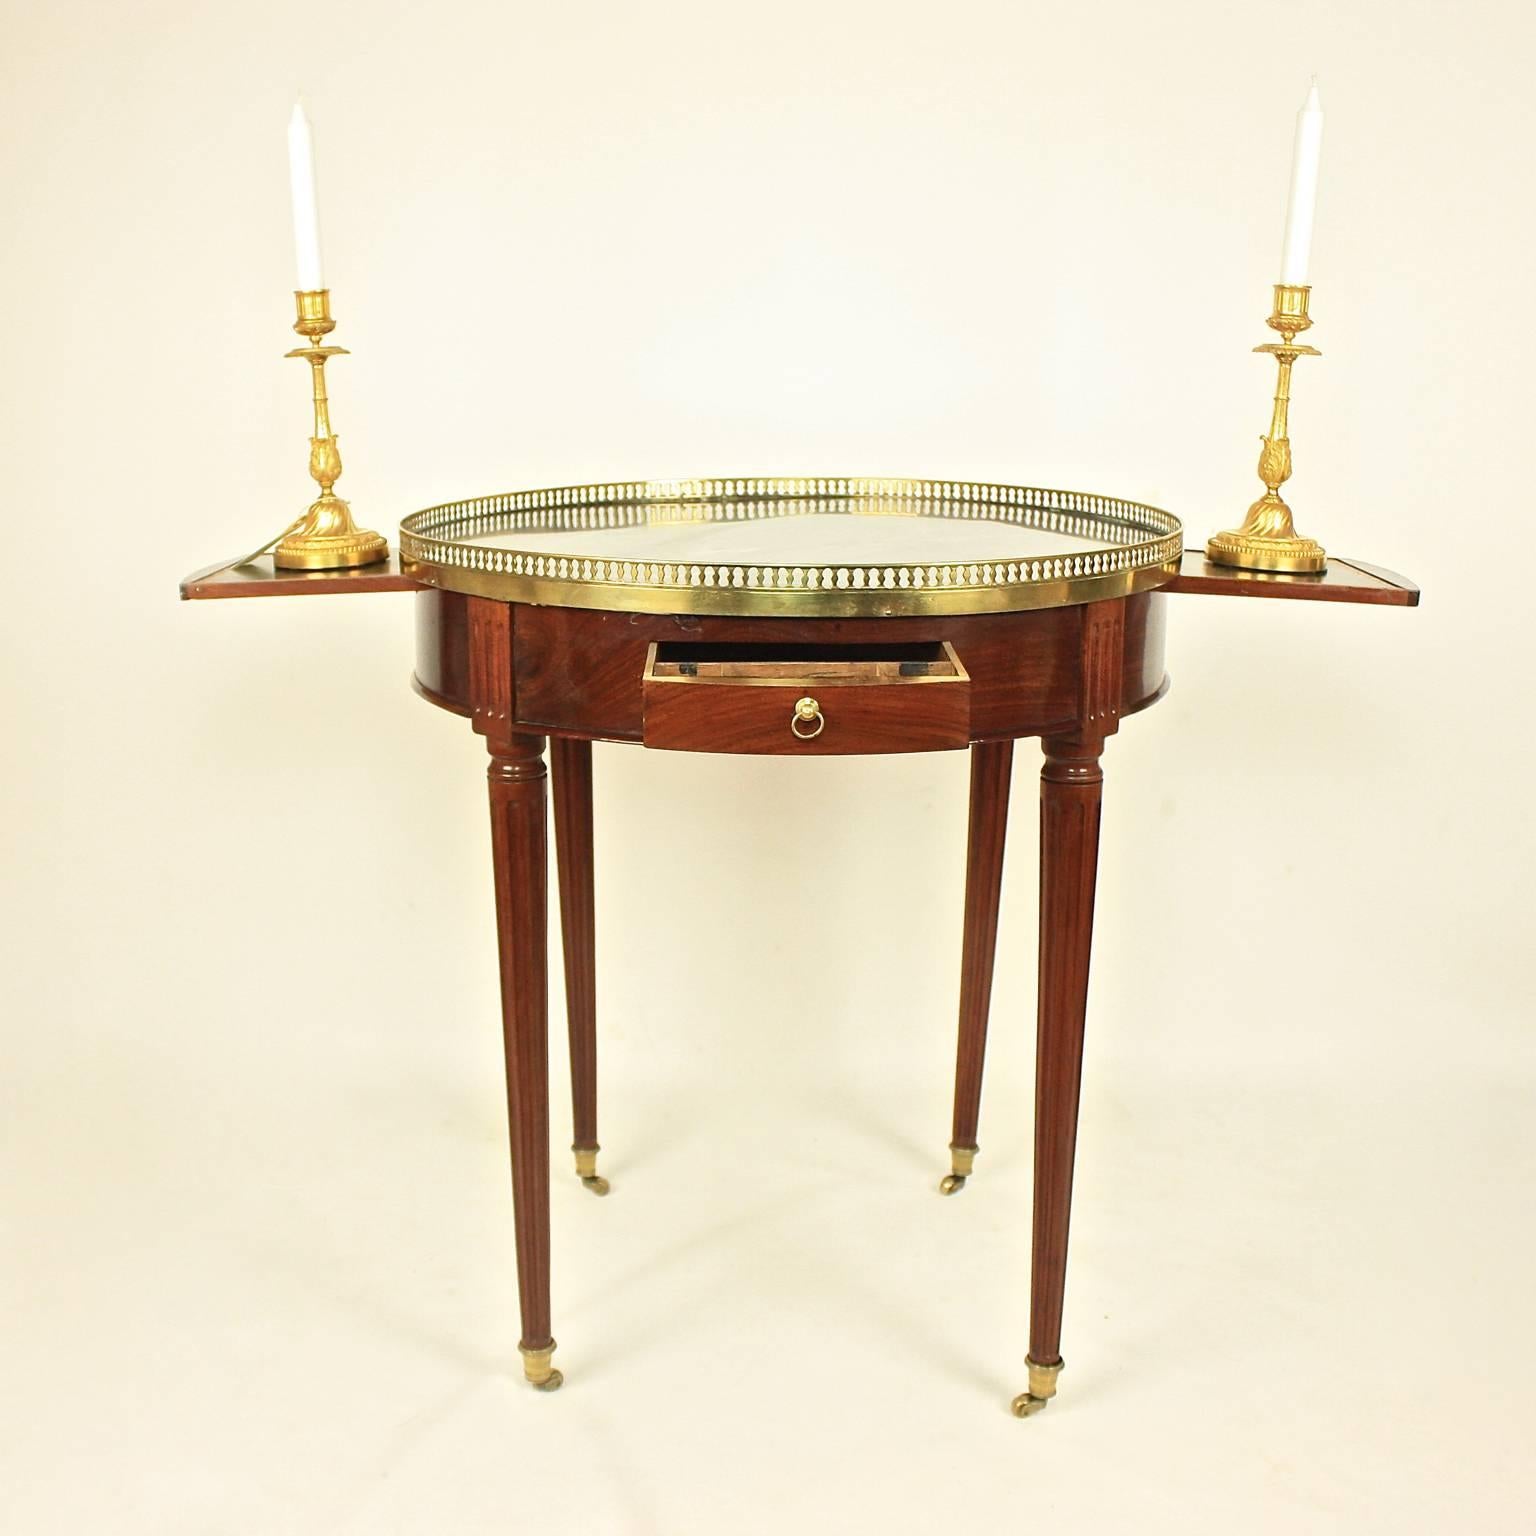 A late 18th century mahogany bouillotte table, the circular grey-veined marble top with a pierced gallery above two frieze drawers flanked by two leather-lined candle slides, with the well-preserved removable top displaying a leather-lined playing